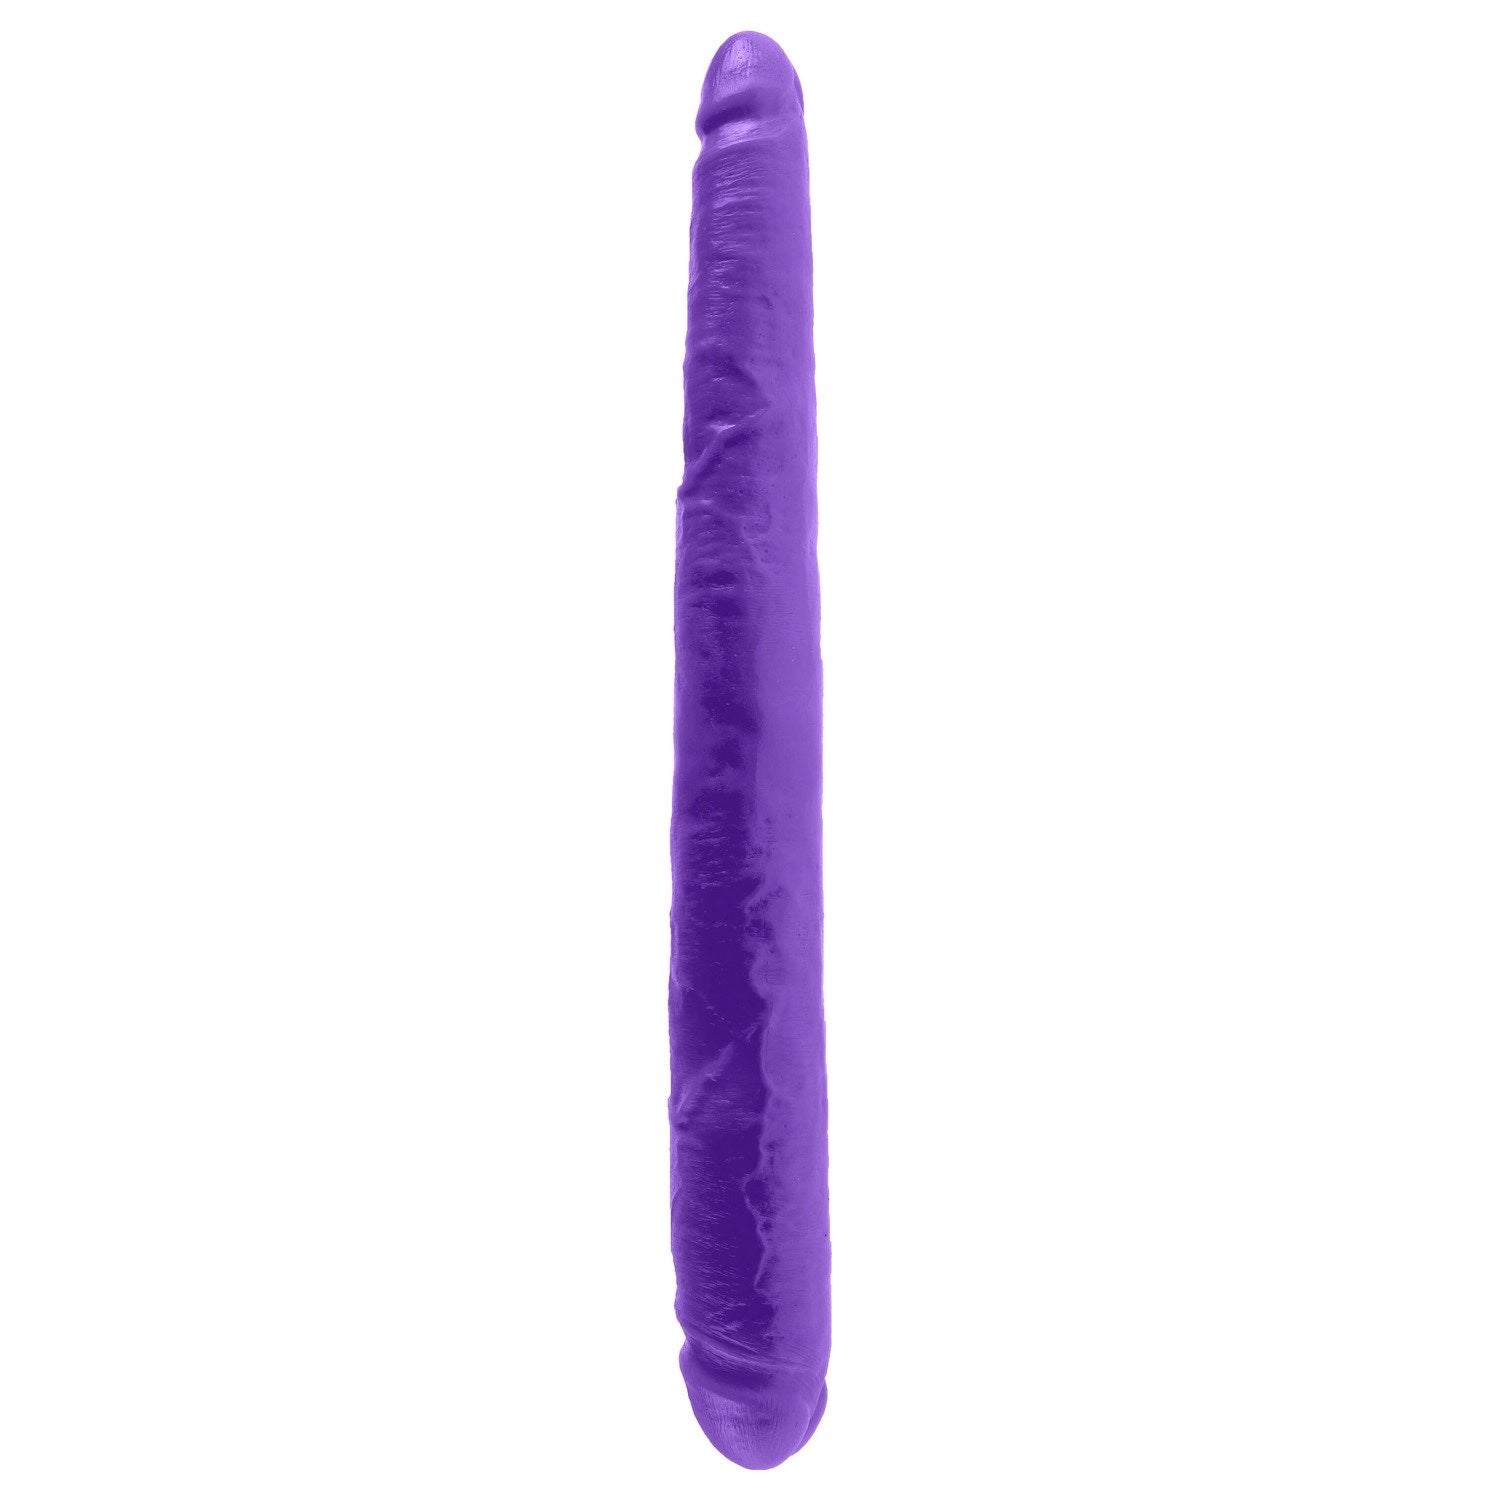 Dillio 16&quot; Double Dong - Purple 40.6 cm by Pipedream